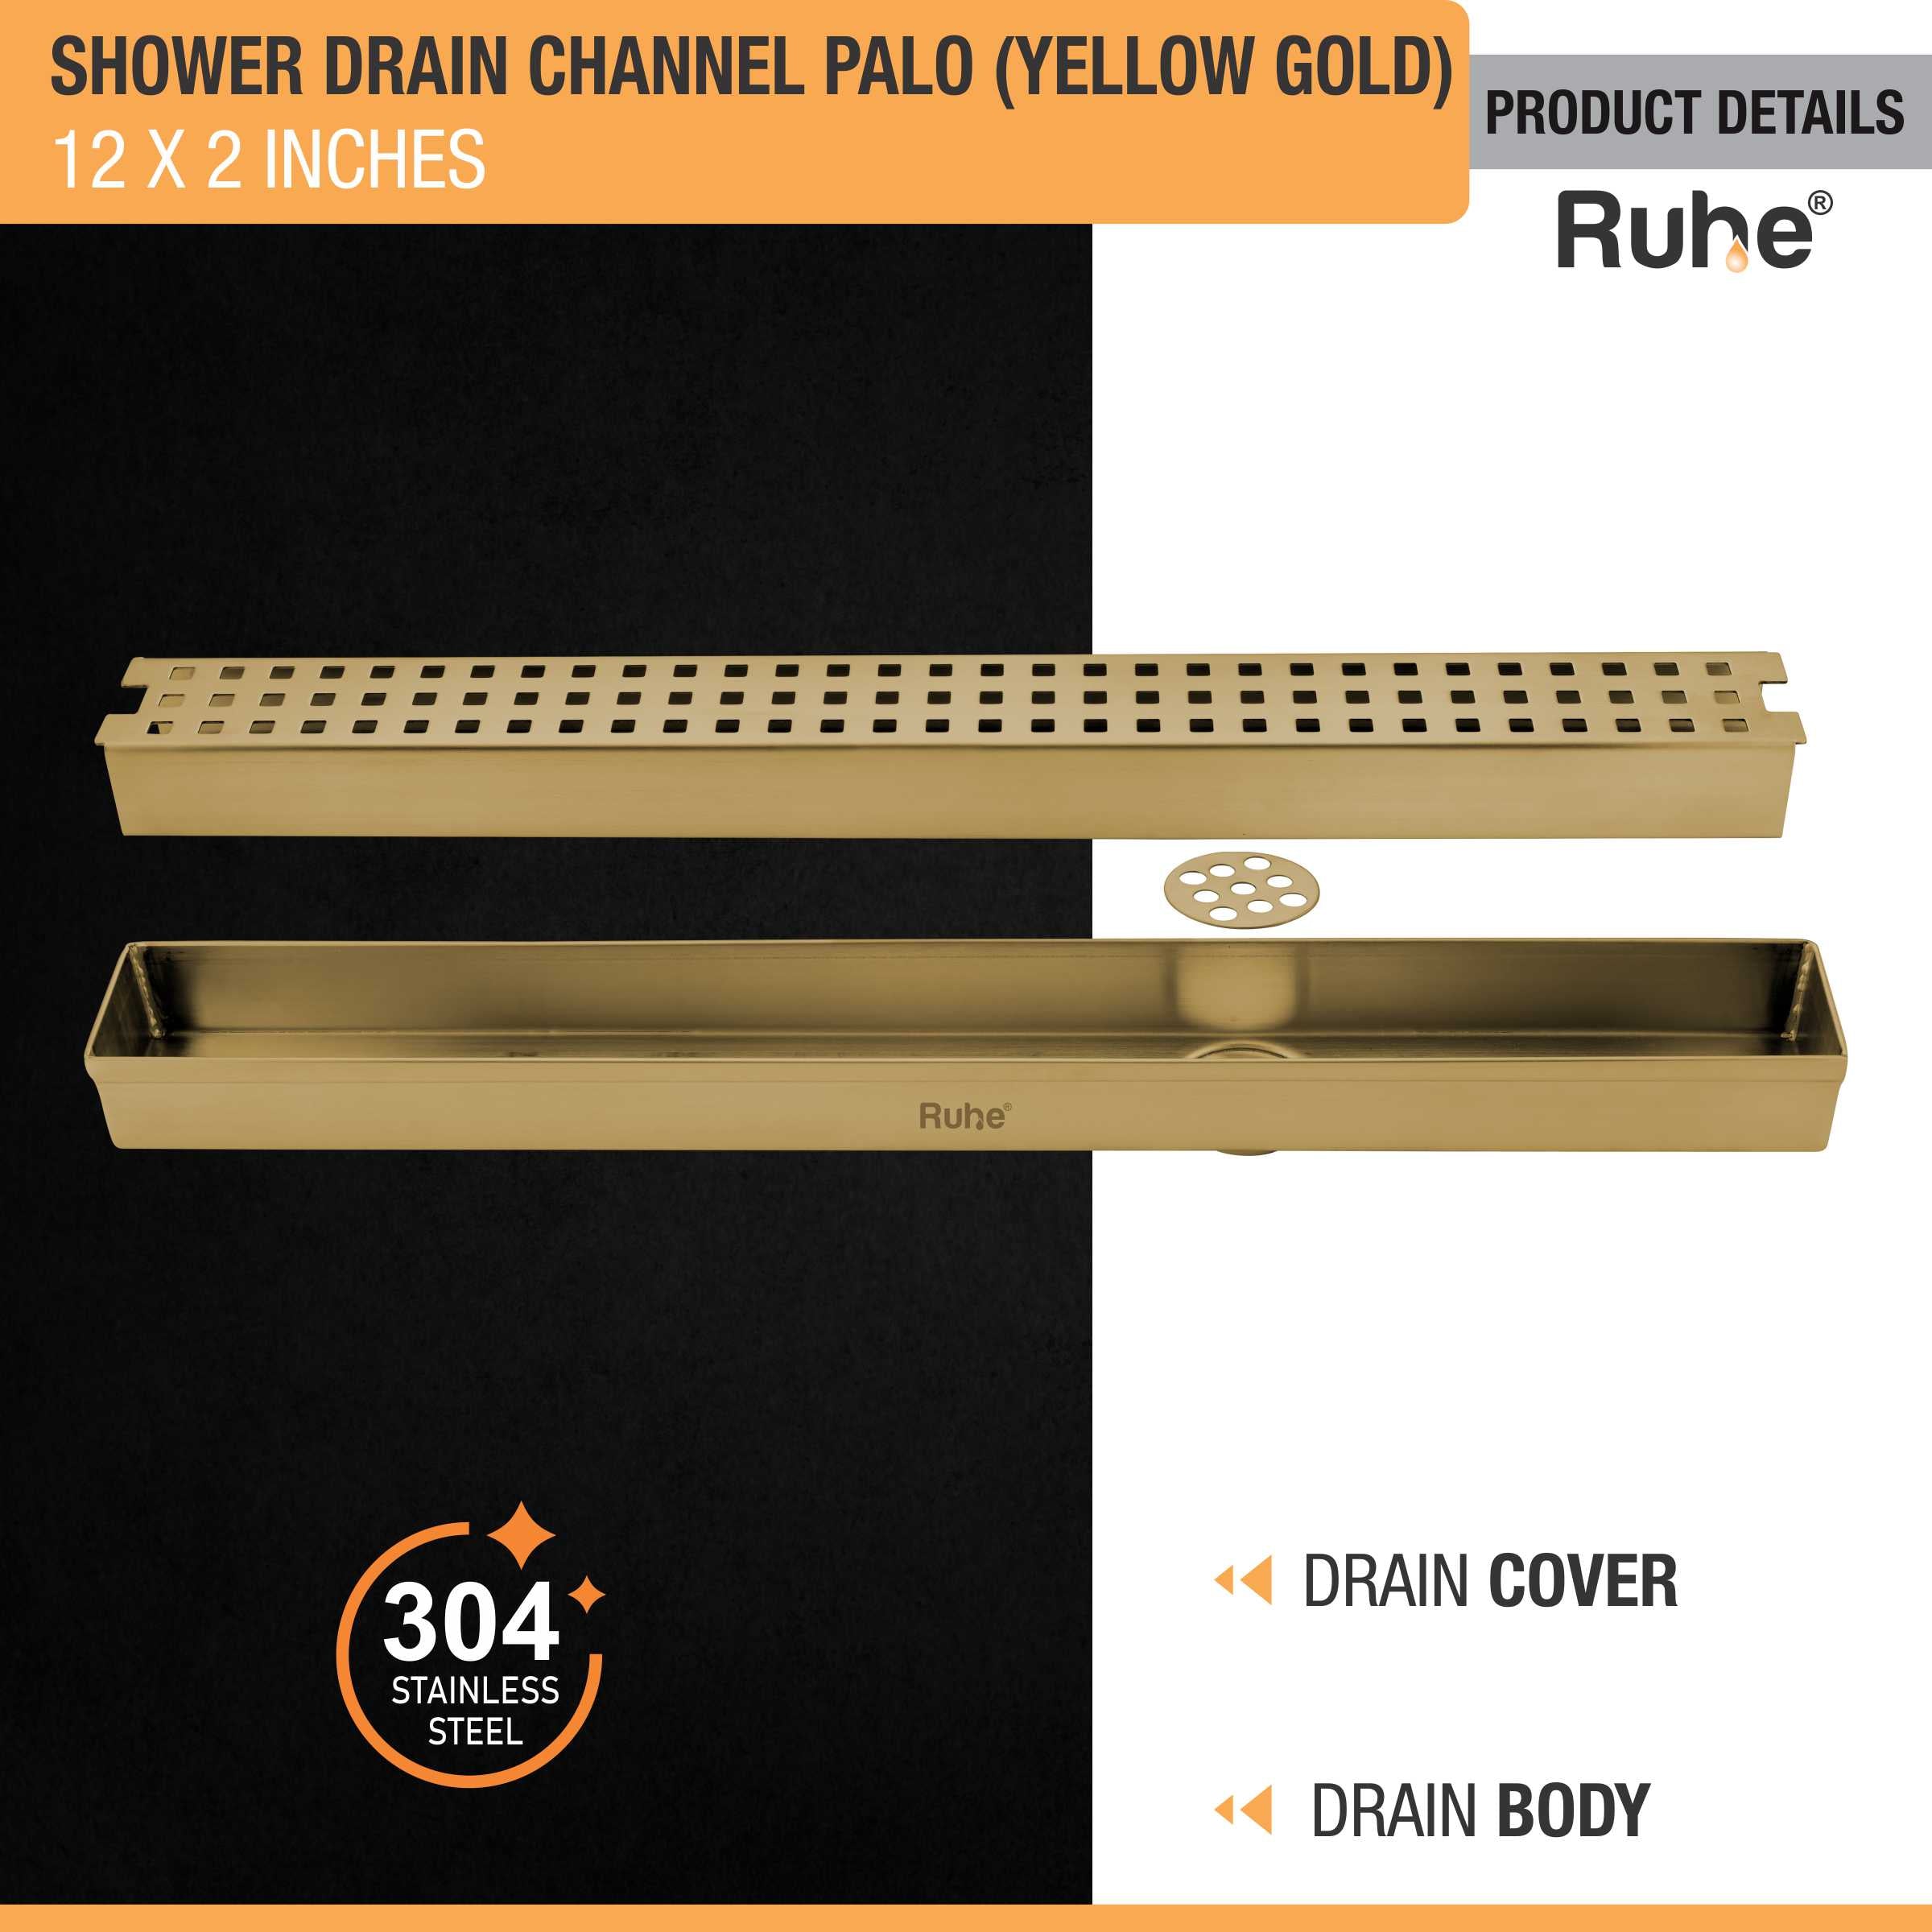 Palo Shower Drain Channel (12 x 2 Inches) YELLOW GOLD product details